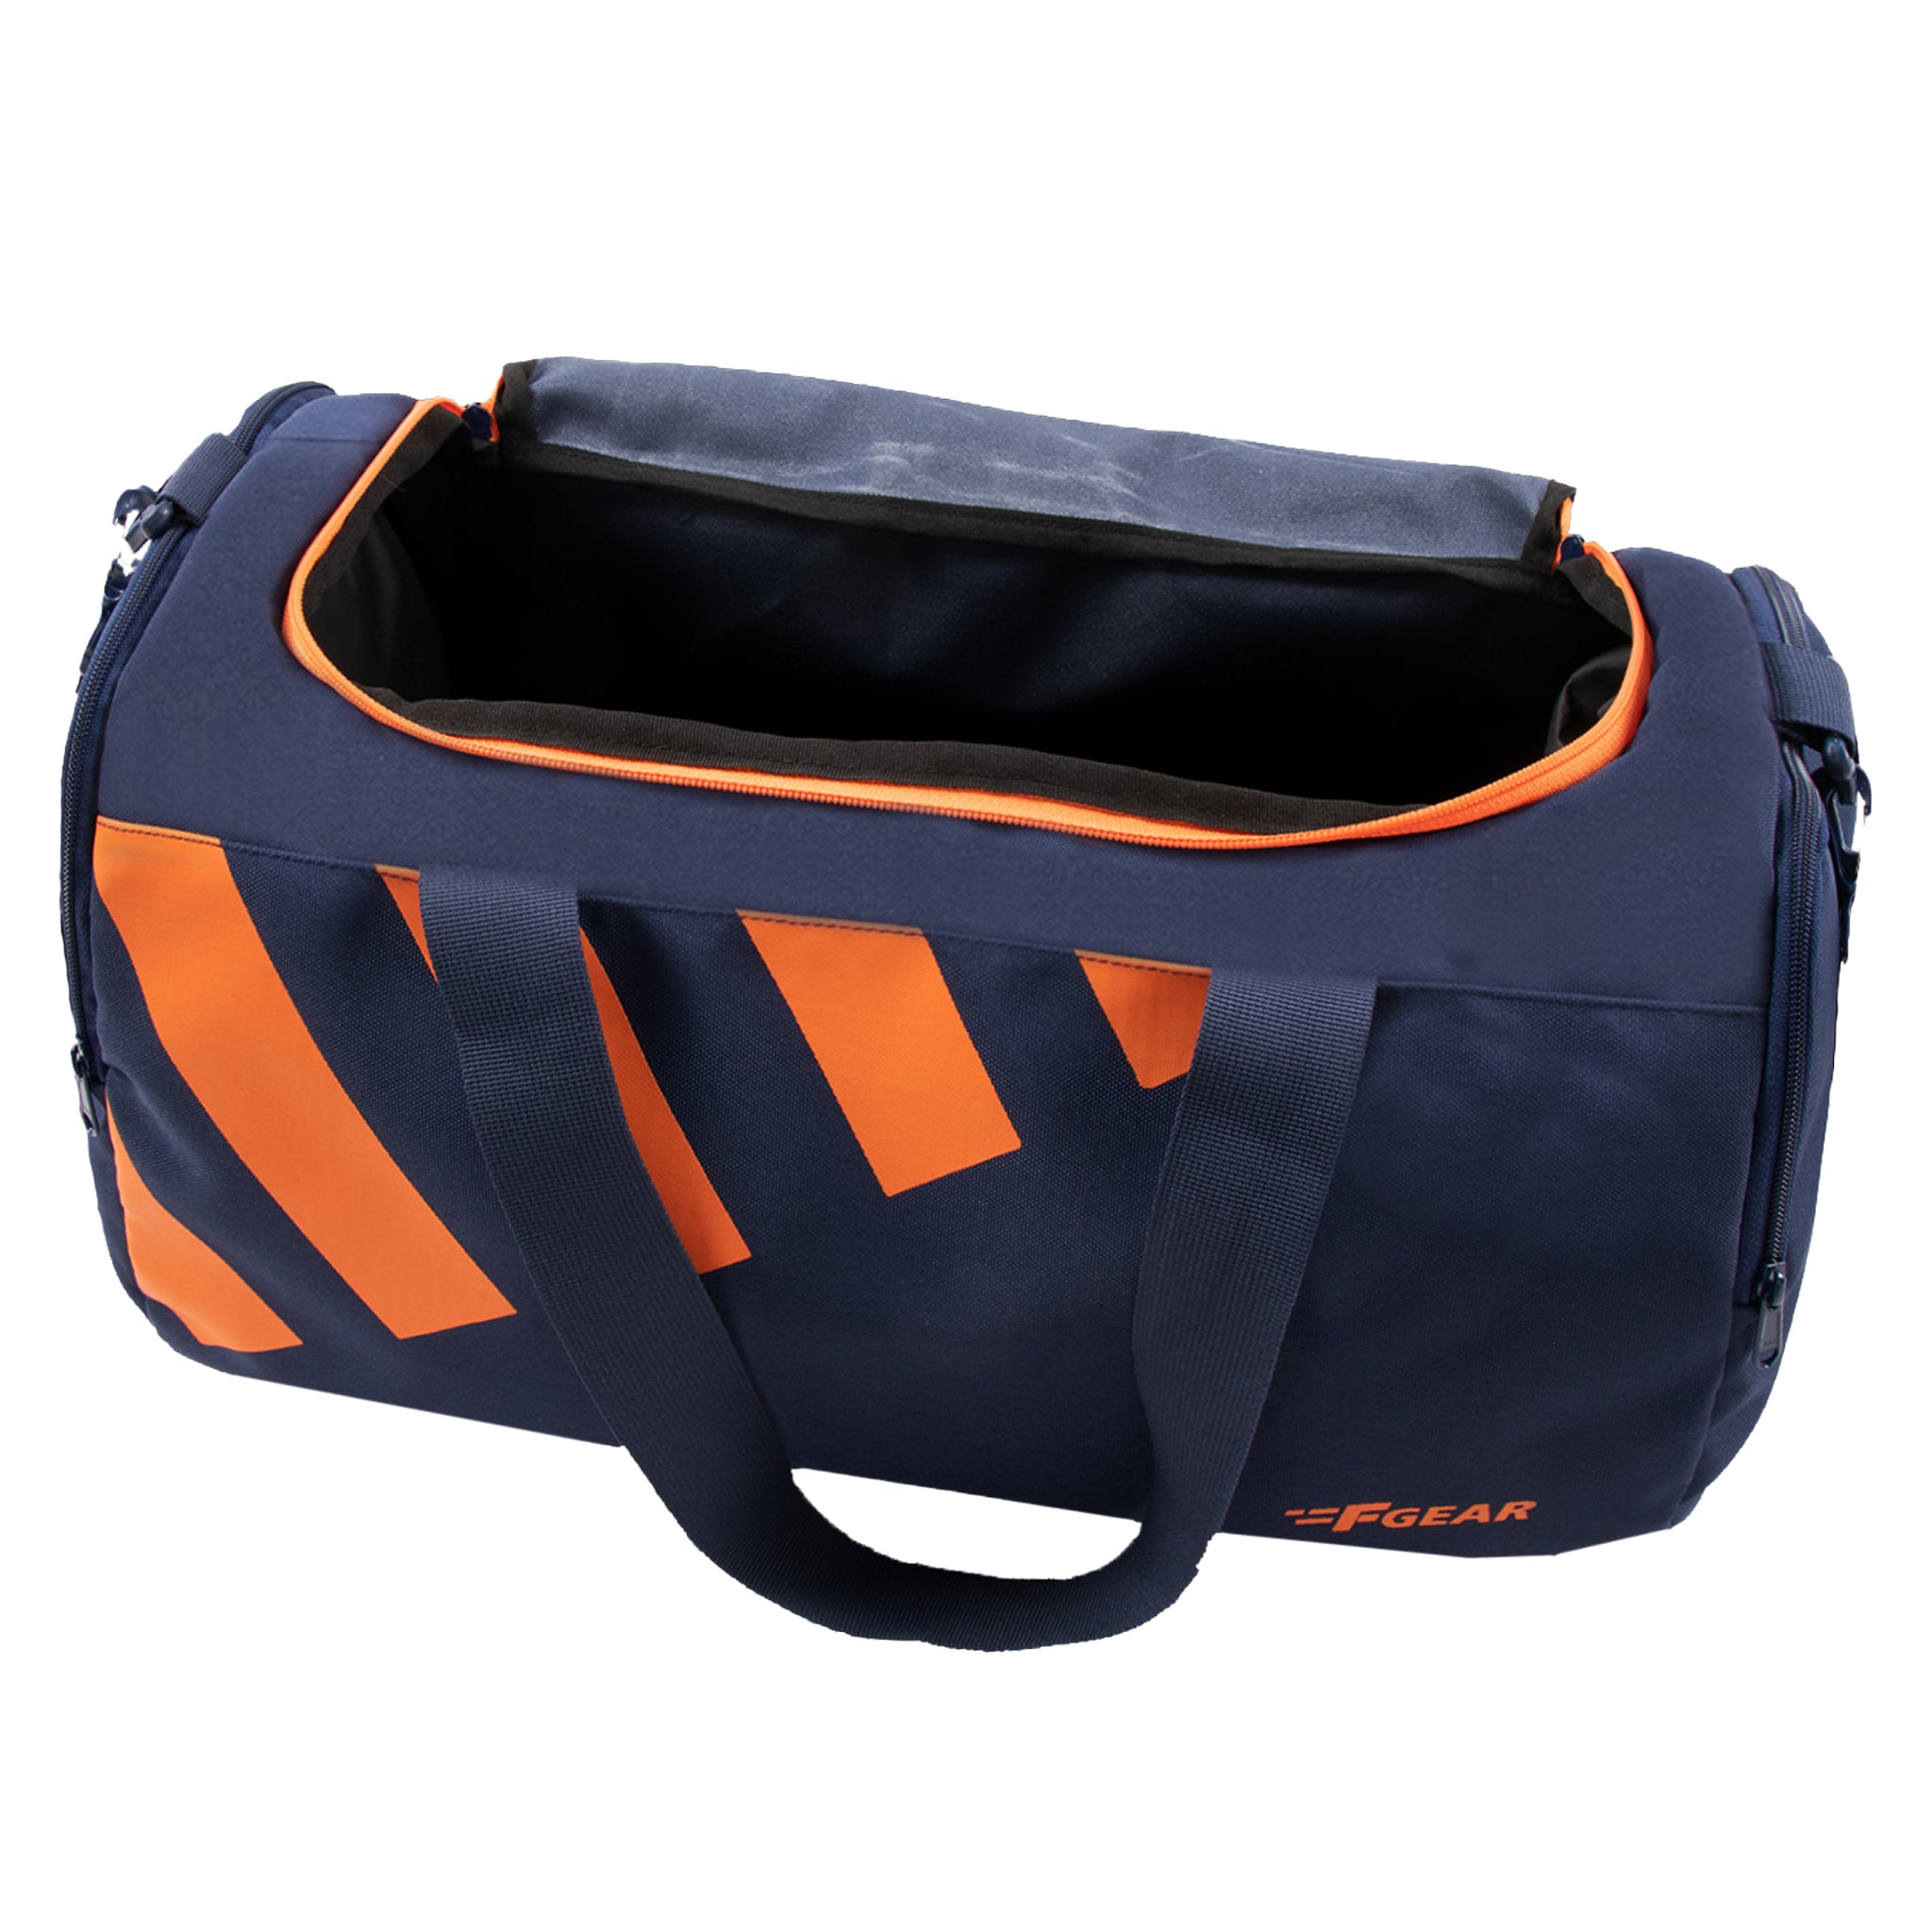 Rogue Old School Gym Bag | Rogue Fitness